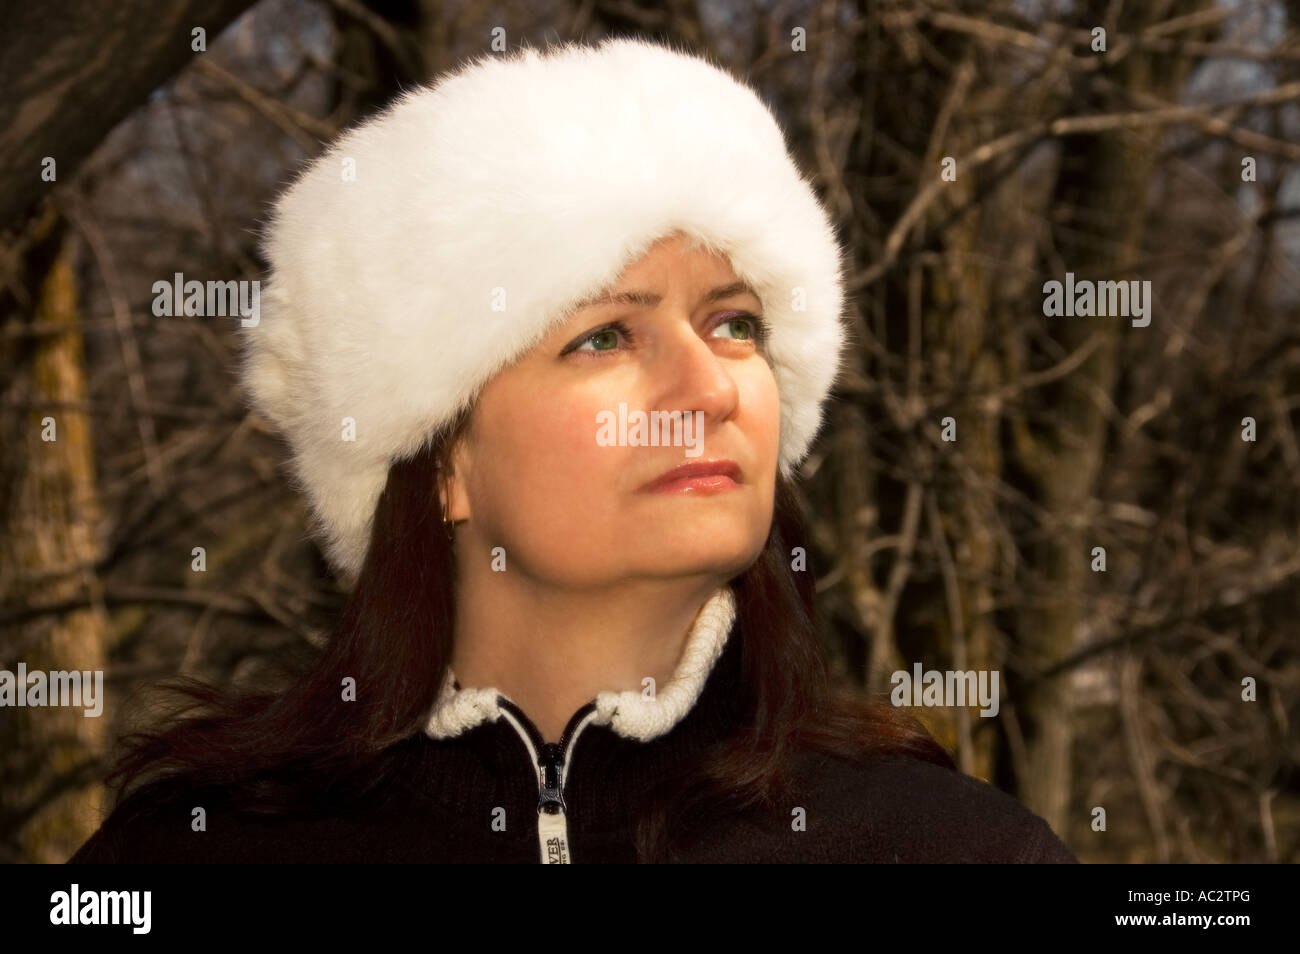 Young woman with a white fur hat Stock Photo